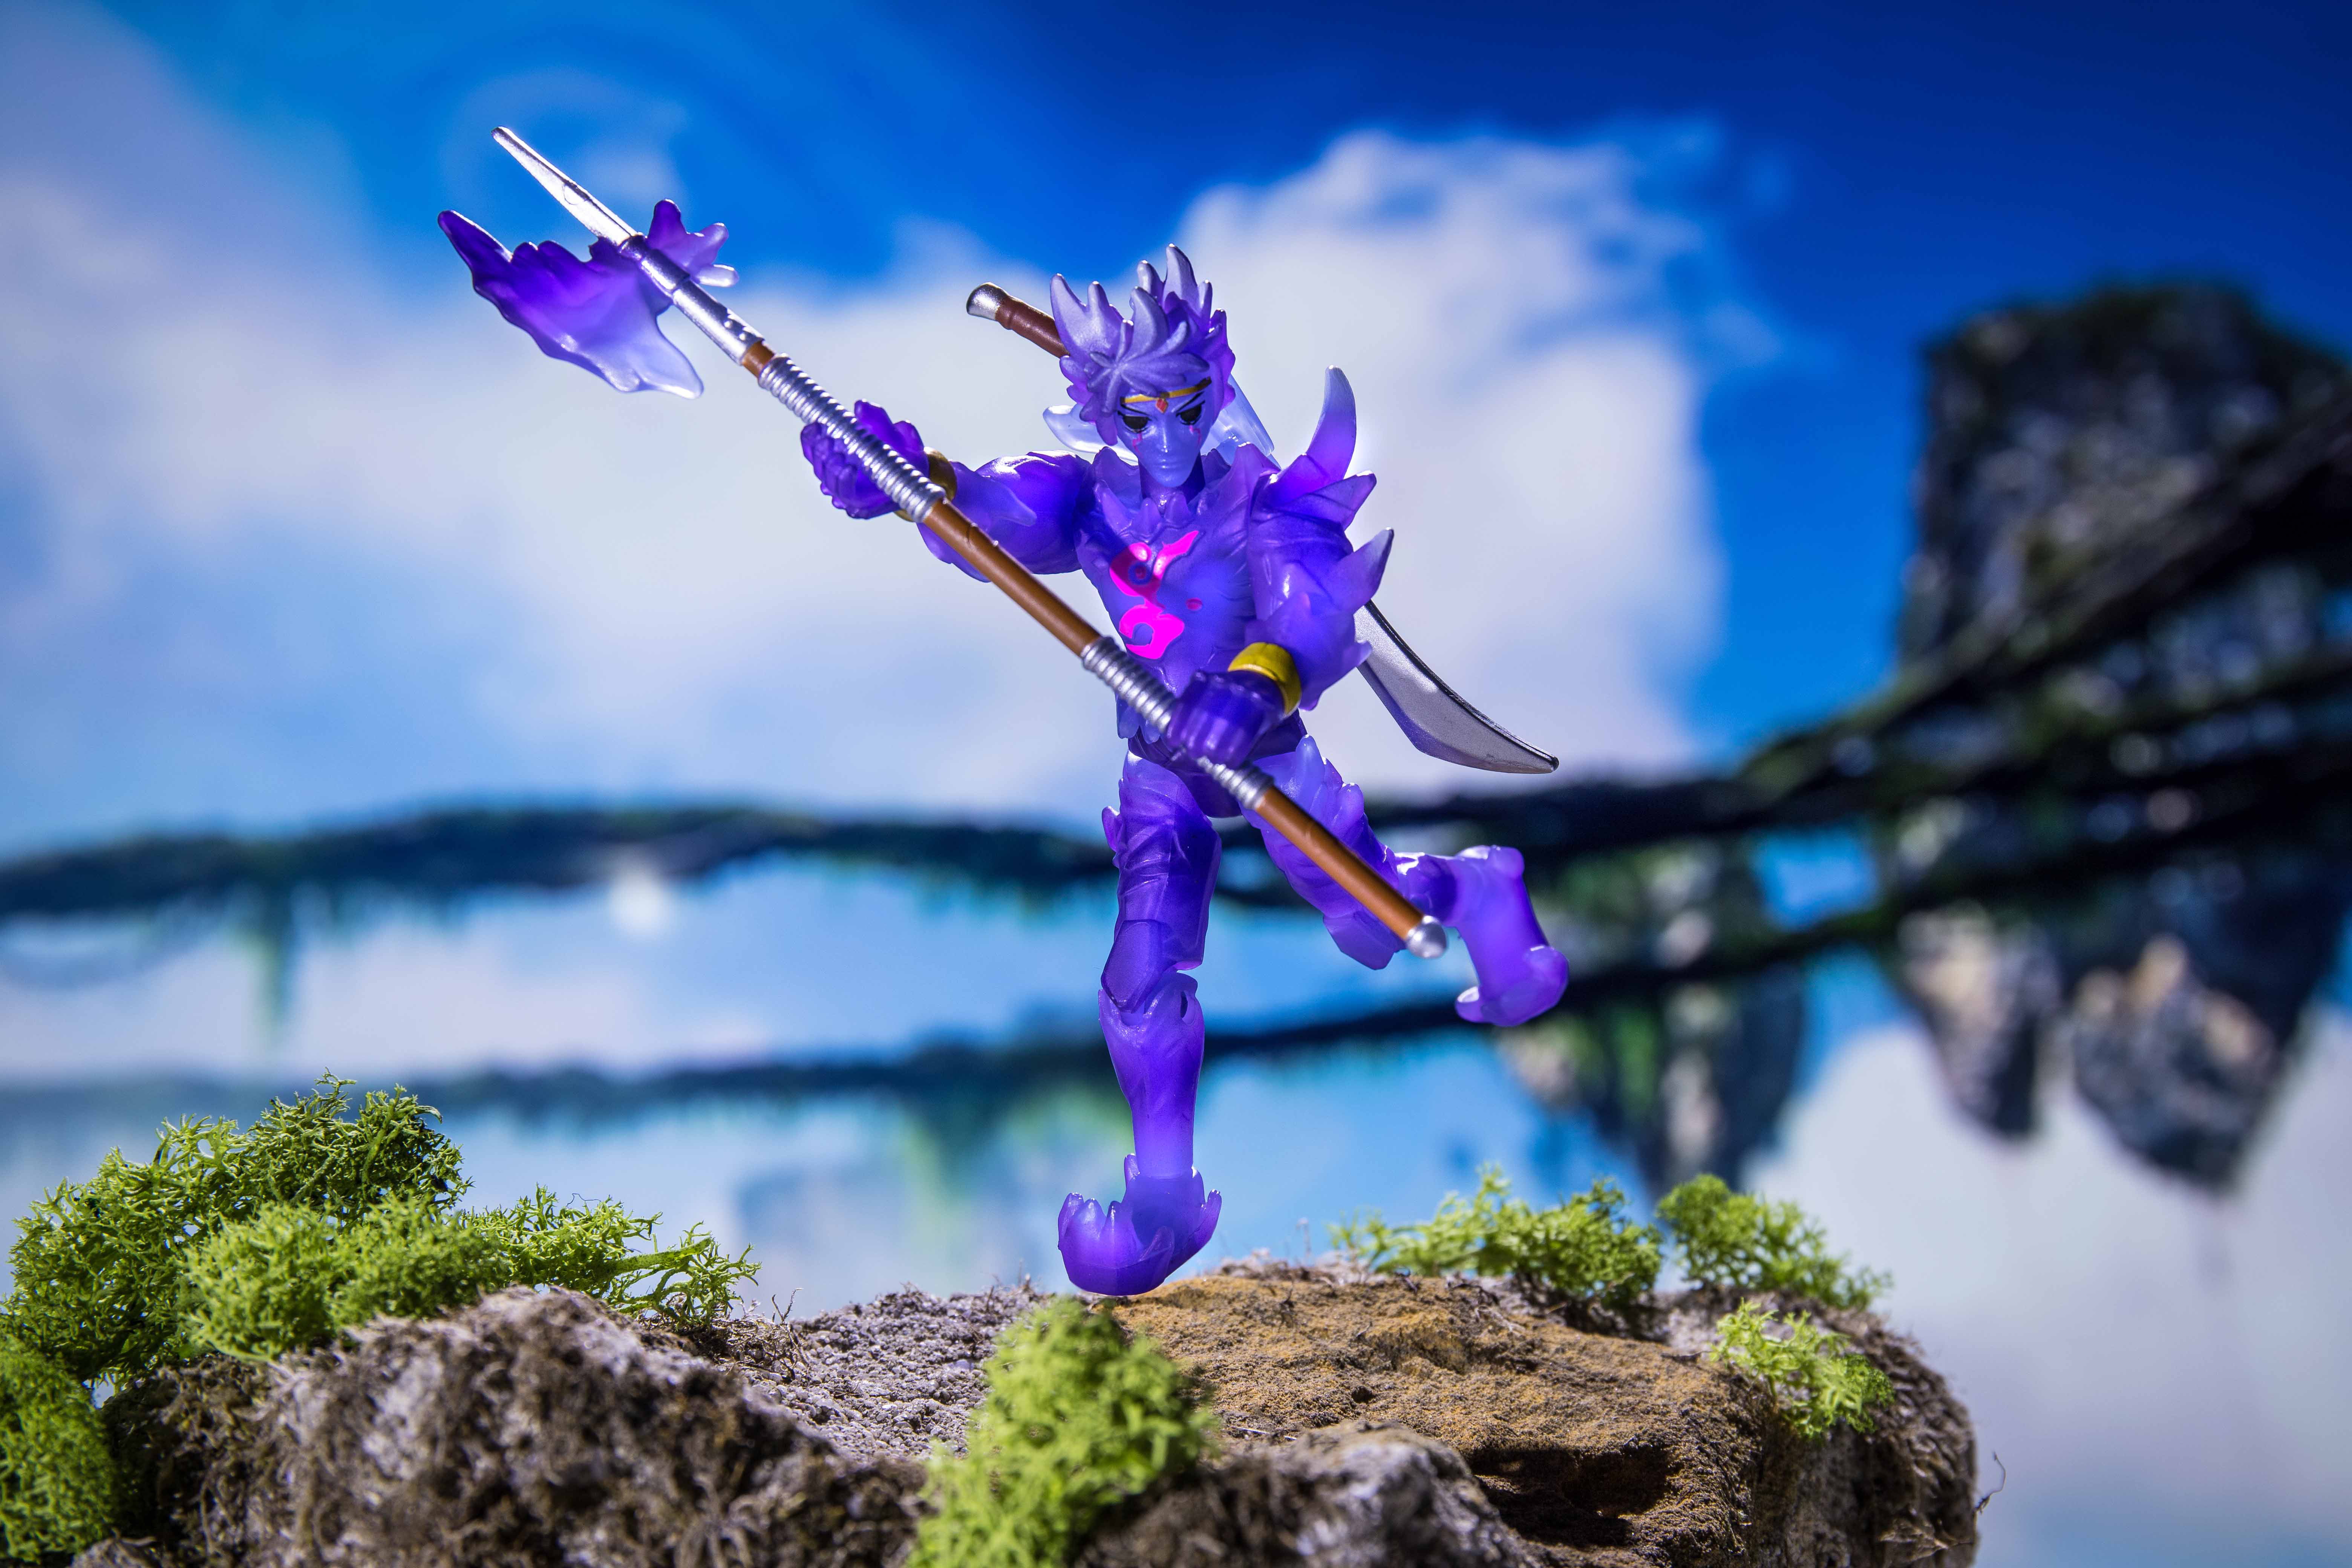 Crystello the Crystal God Roblox Action Figure 4